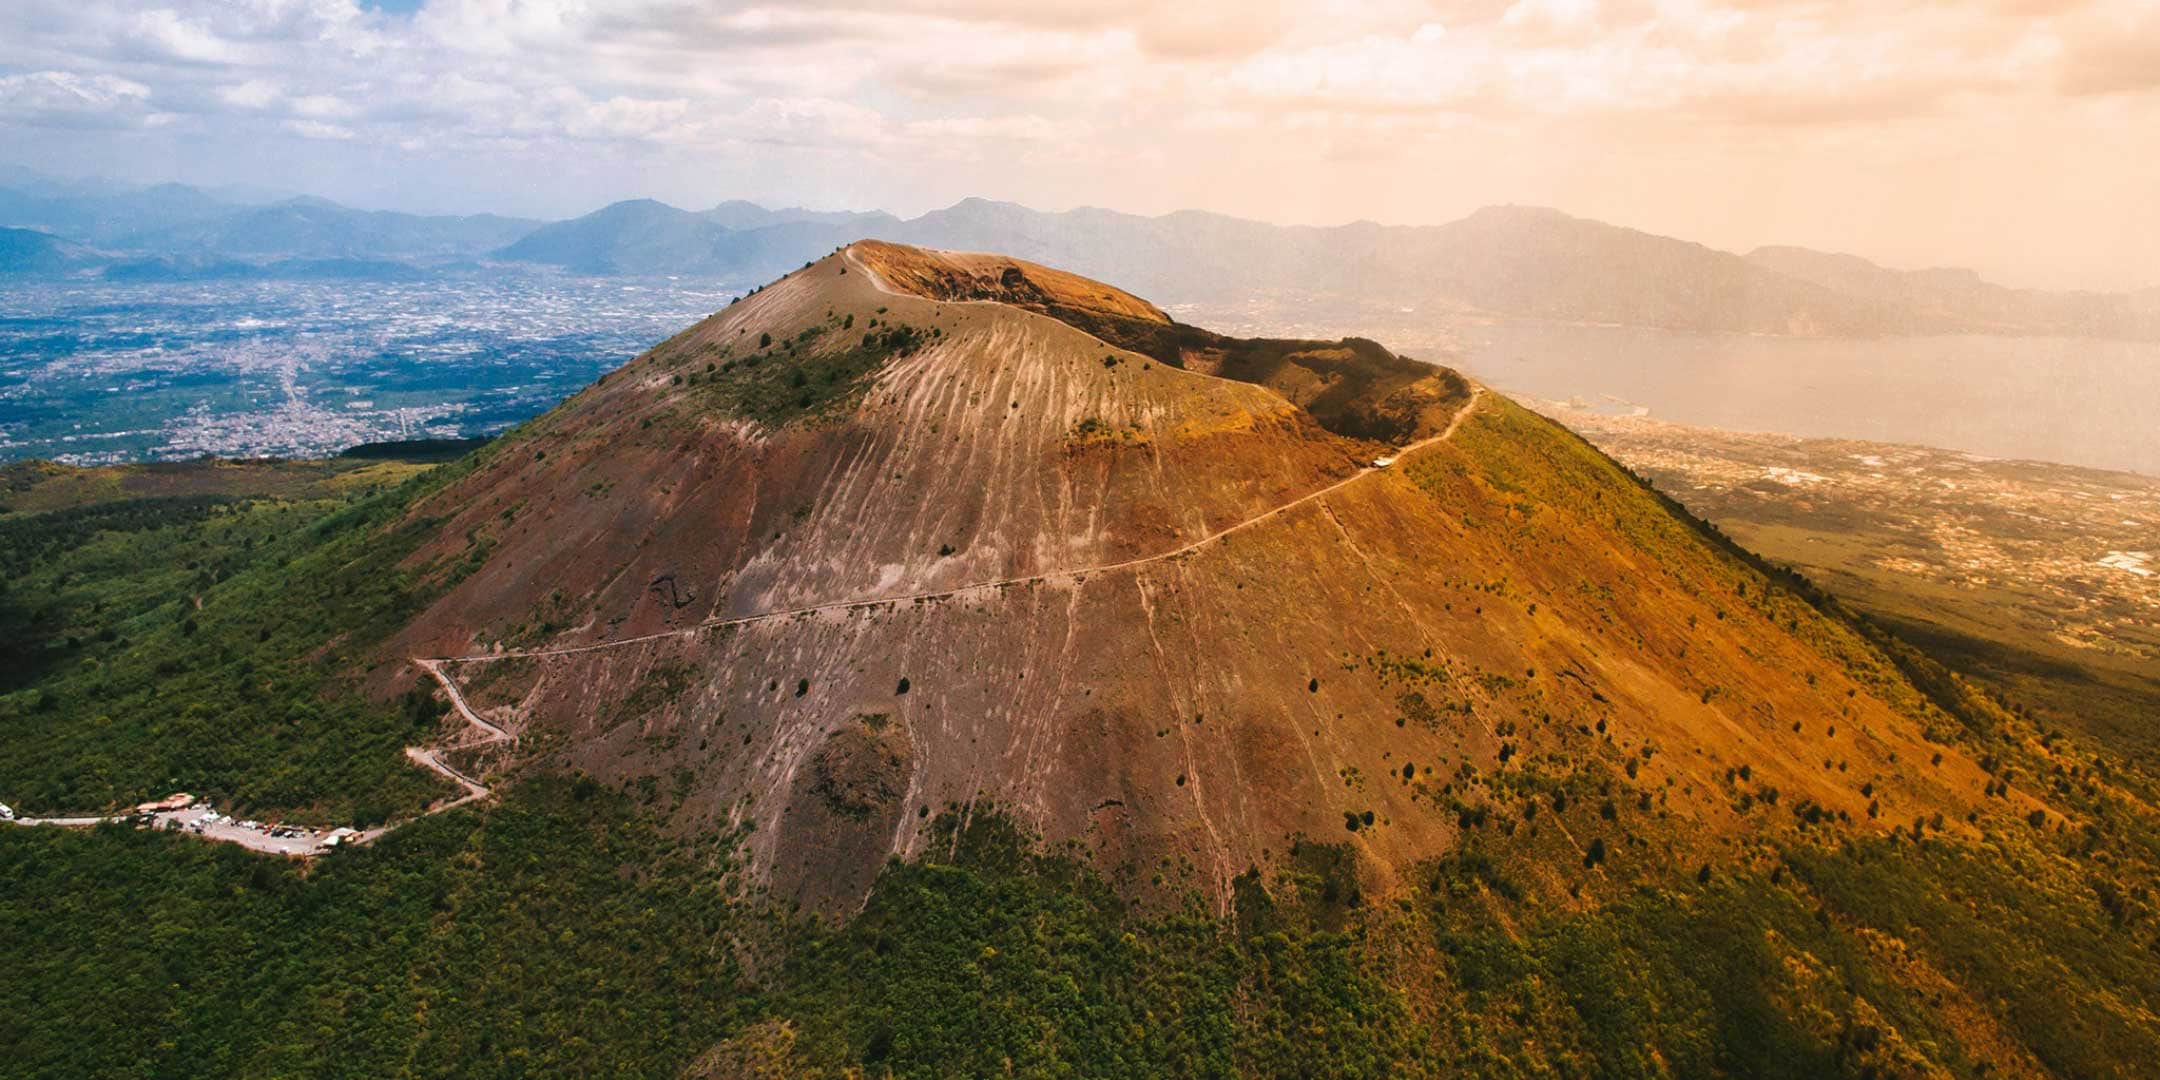 Visiting Mount Vesuvius from Naples on your own